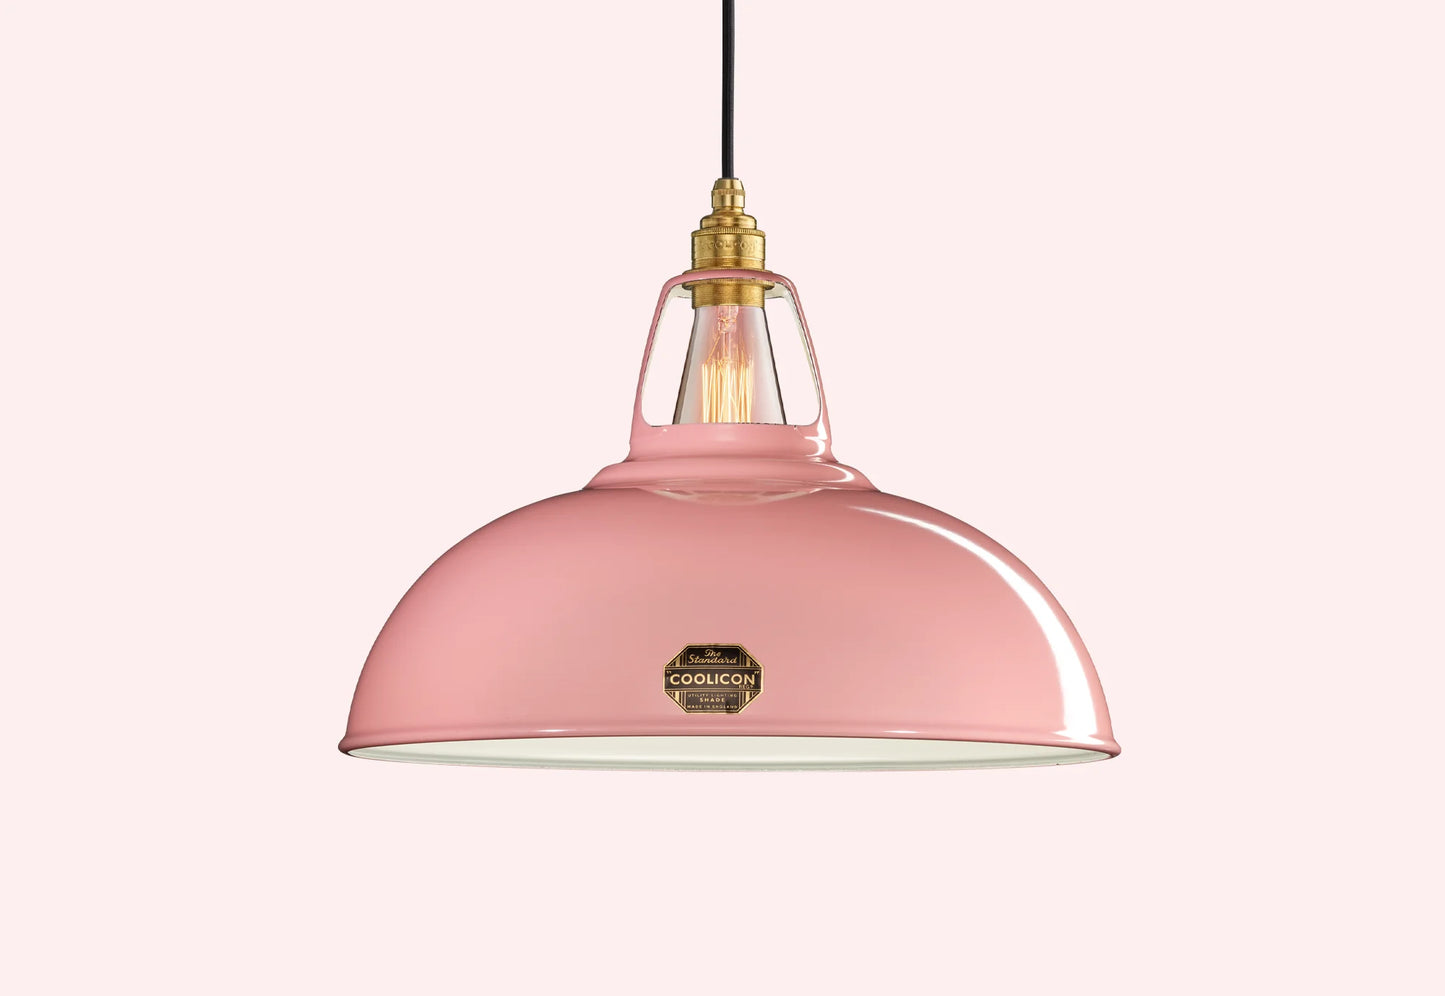 Large Powder Pink Coolicon lampshade with a Porcelain pendant set over a light pink background